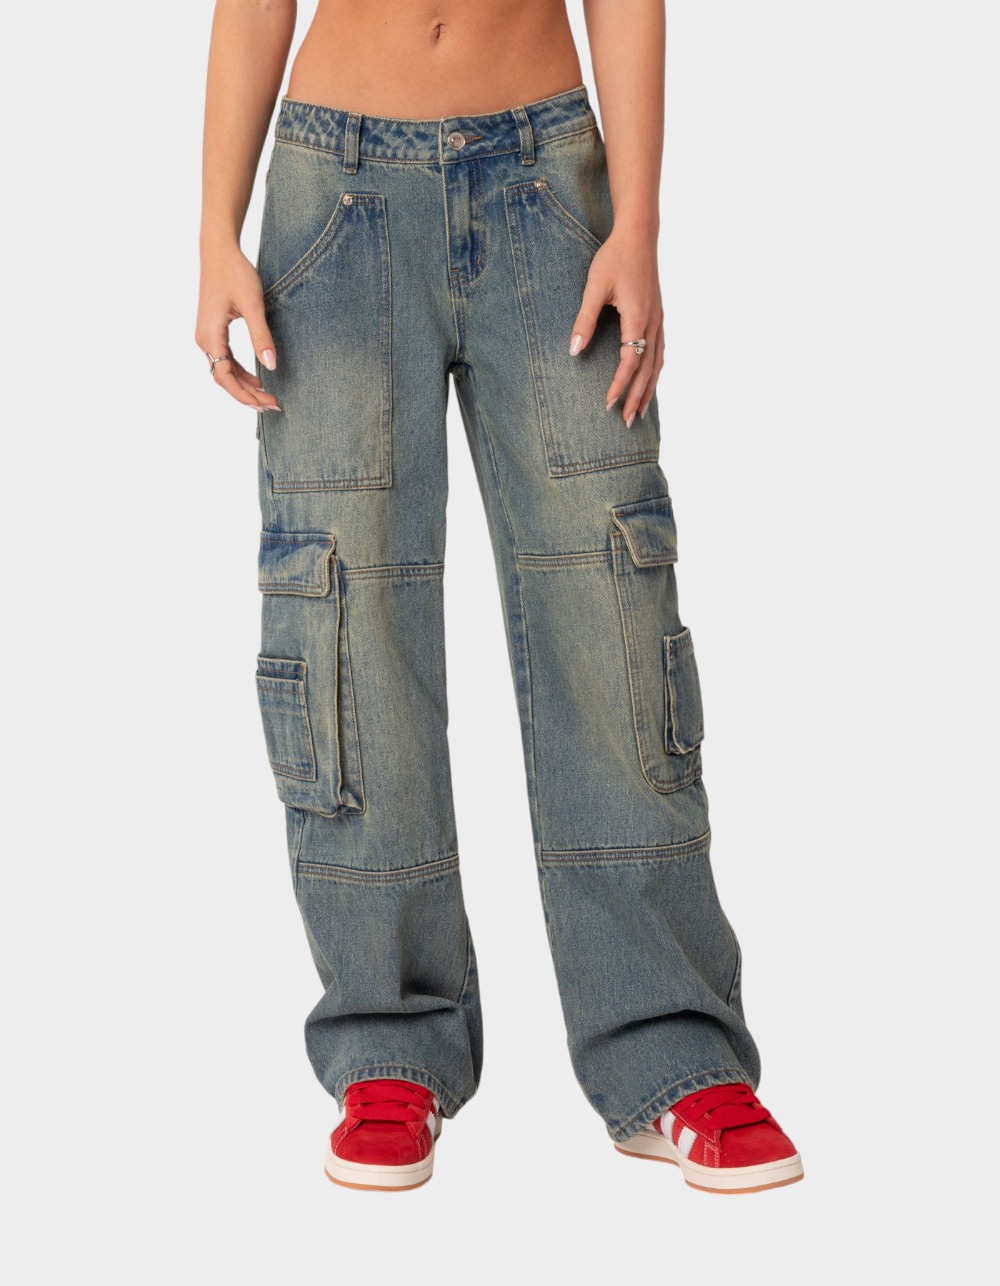 EDIKTED Westie Low Rise Washed Cargo Jeans